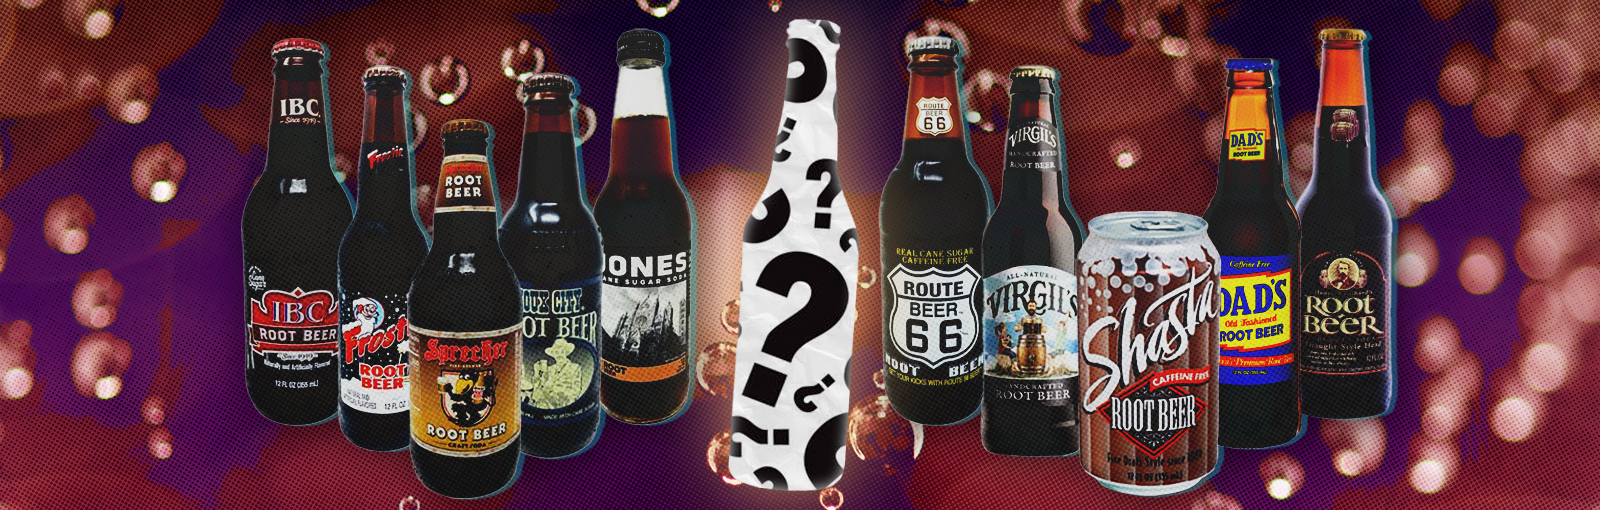 what is the best root beer